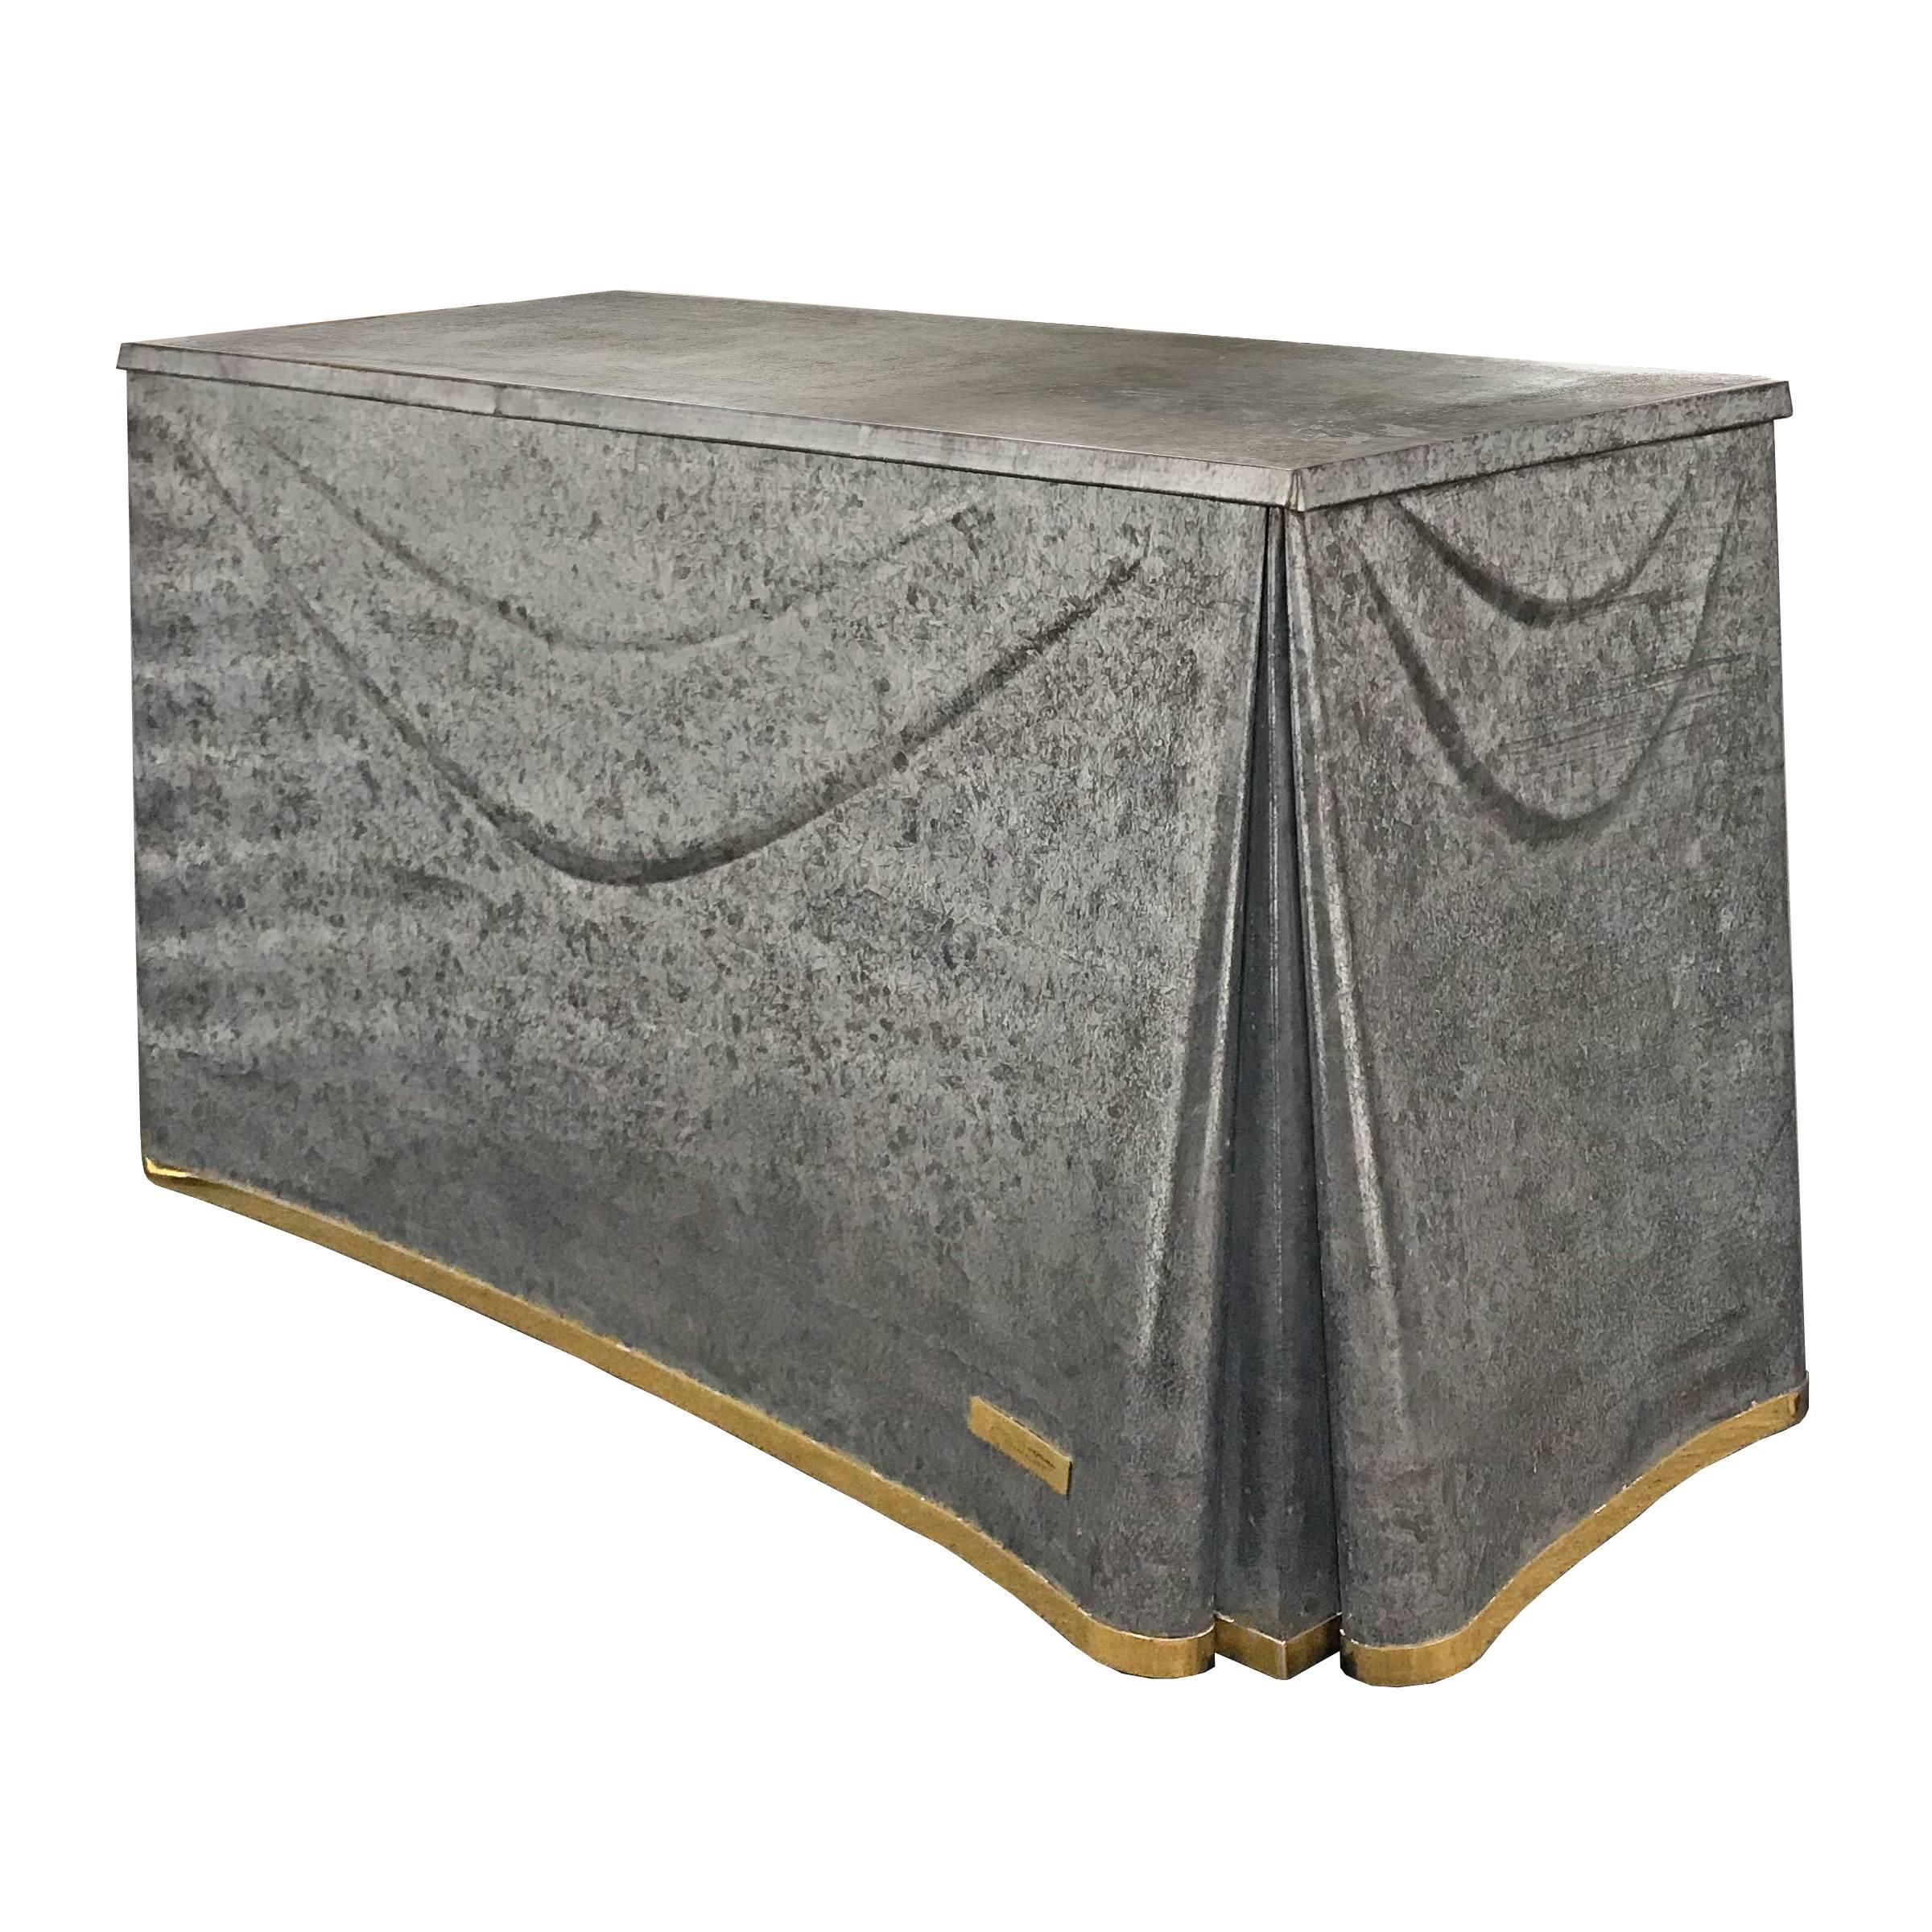 A 21st century reedition John Dickinson galvanized tin console table being of draped cloth form, with brass trim and applied tag reading, 